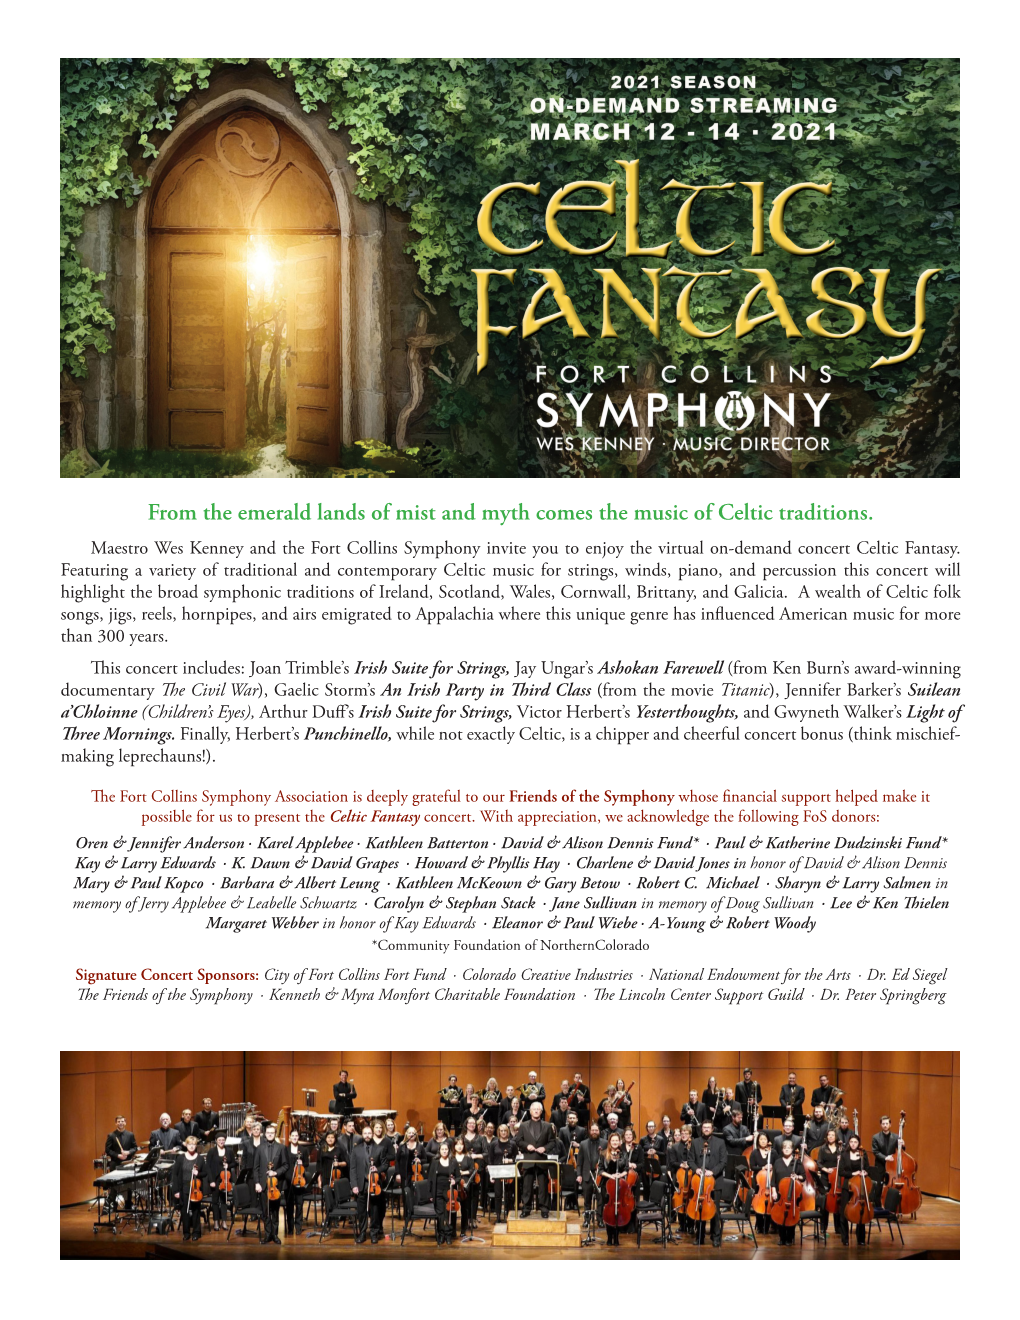 From the Emerald Lands of Mist and Myth Comes the Music of Celtic Traditions